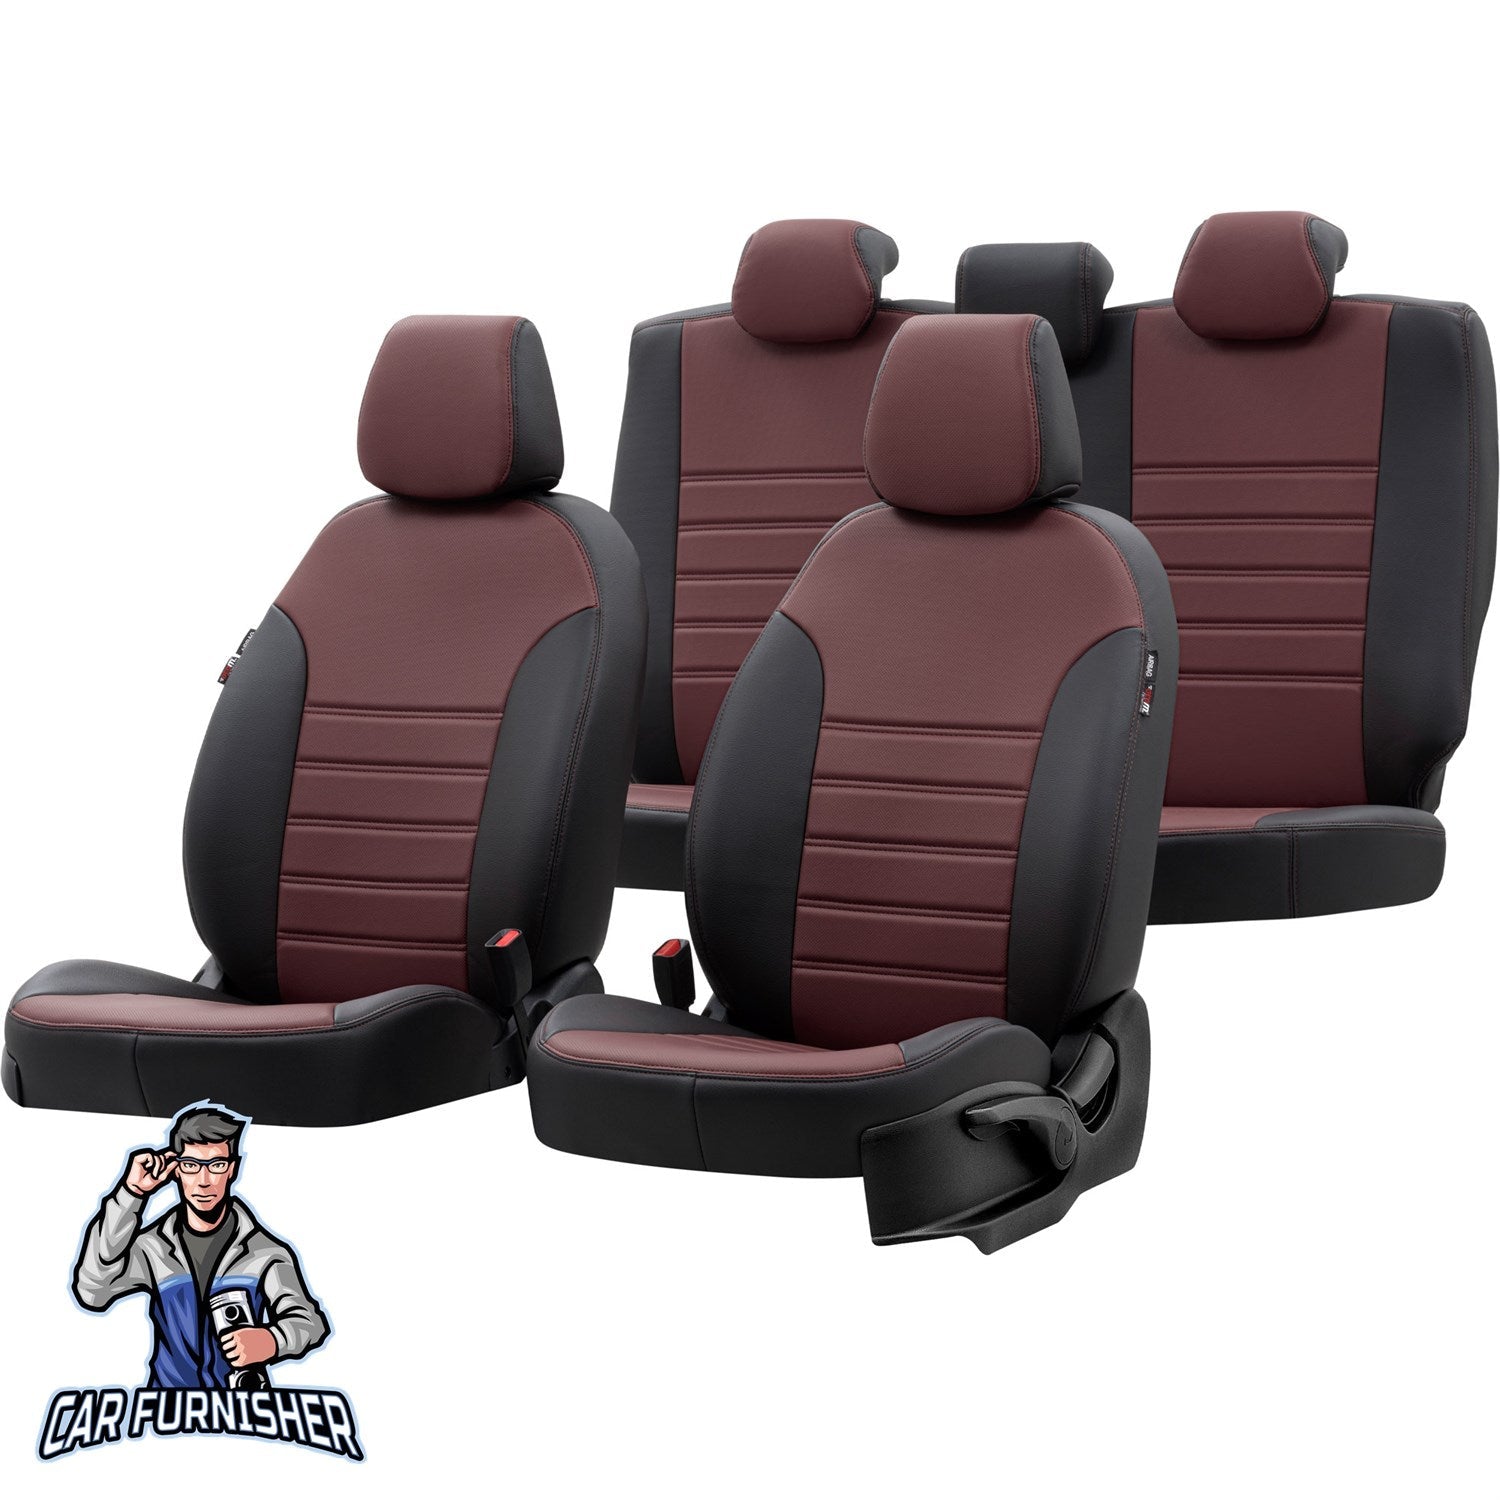 VW Beetle Car Seat Cover 2011-2017 A5 Istanbul Design Burgundy Leather & Fabric